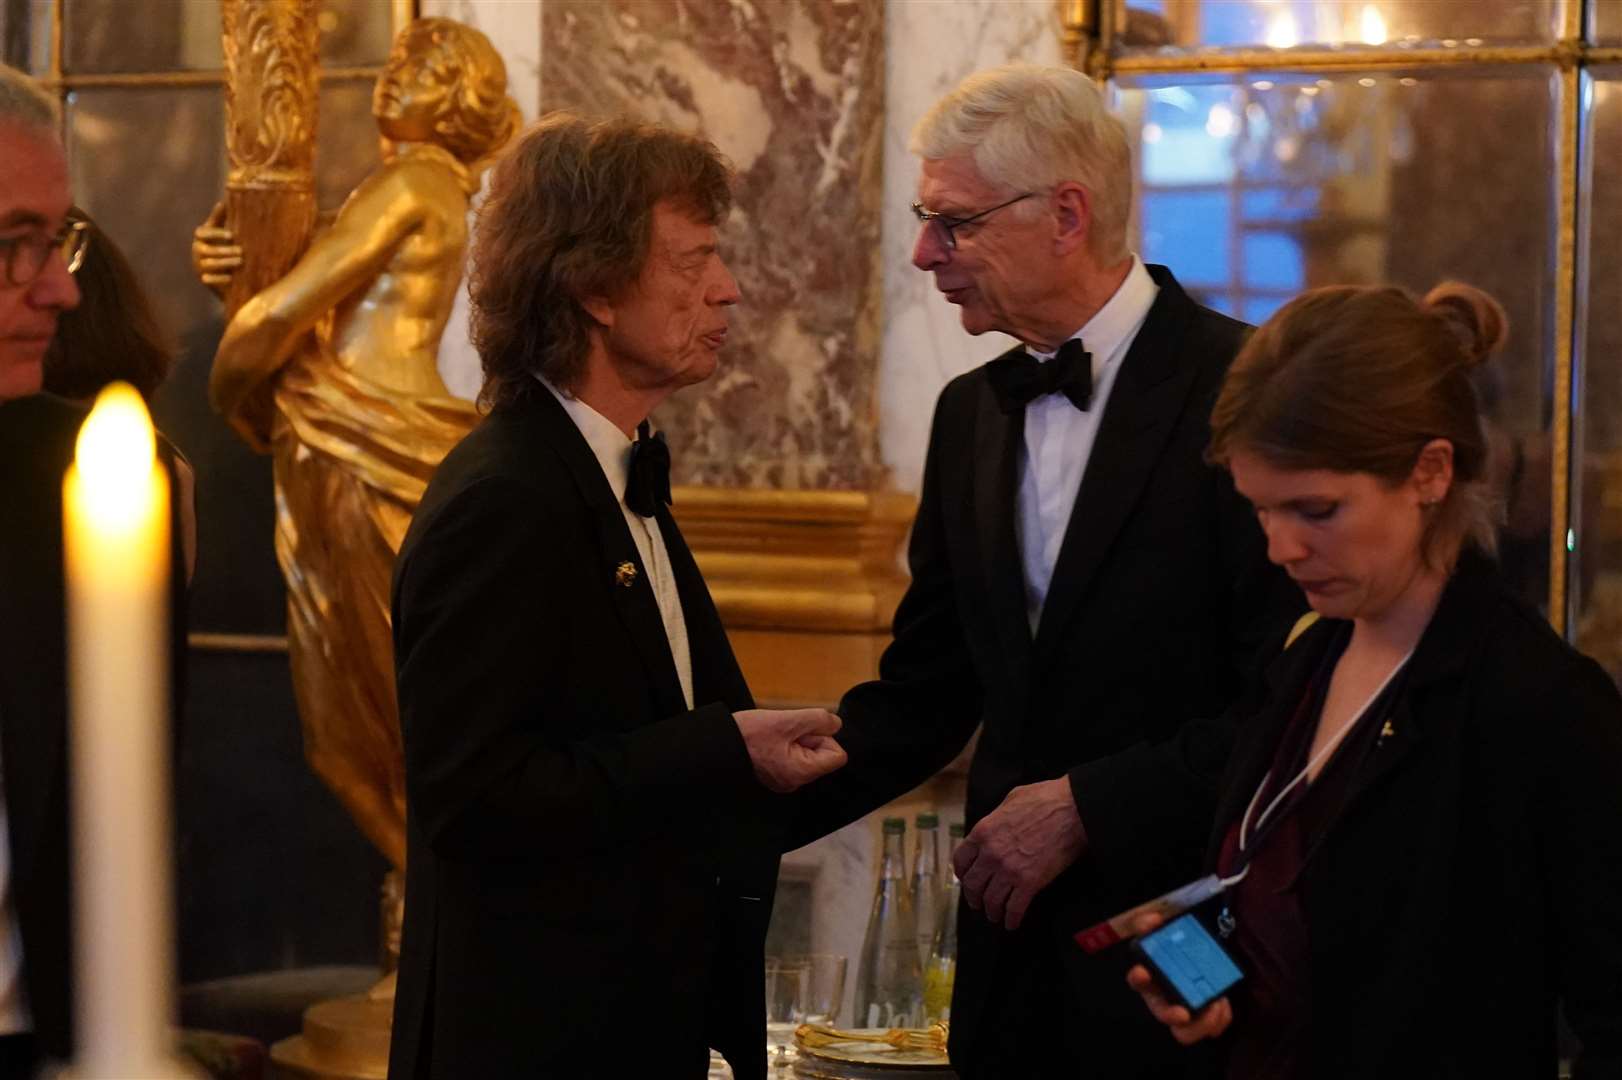 Sir Mick Jagger and Arsene Wenger attending the state banquet (Arthur Edwards/The Sun/PA)